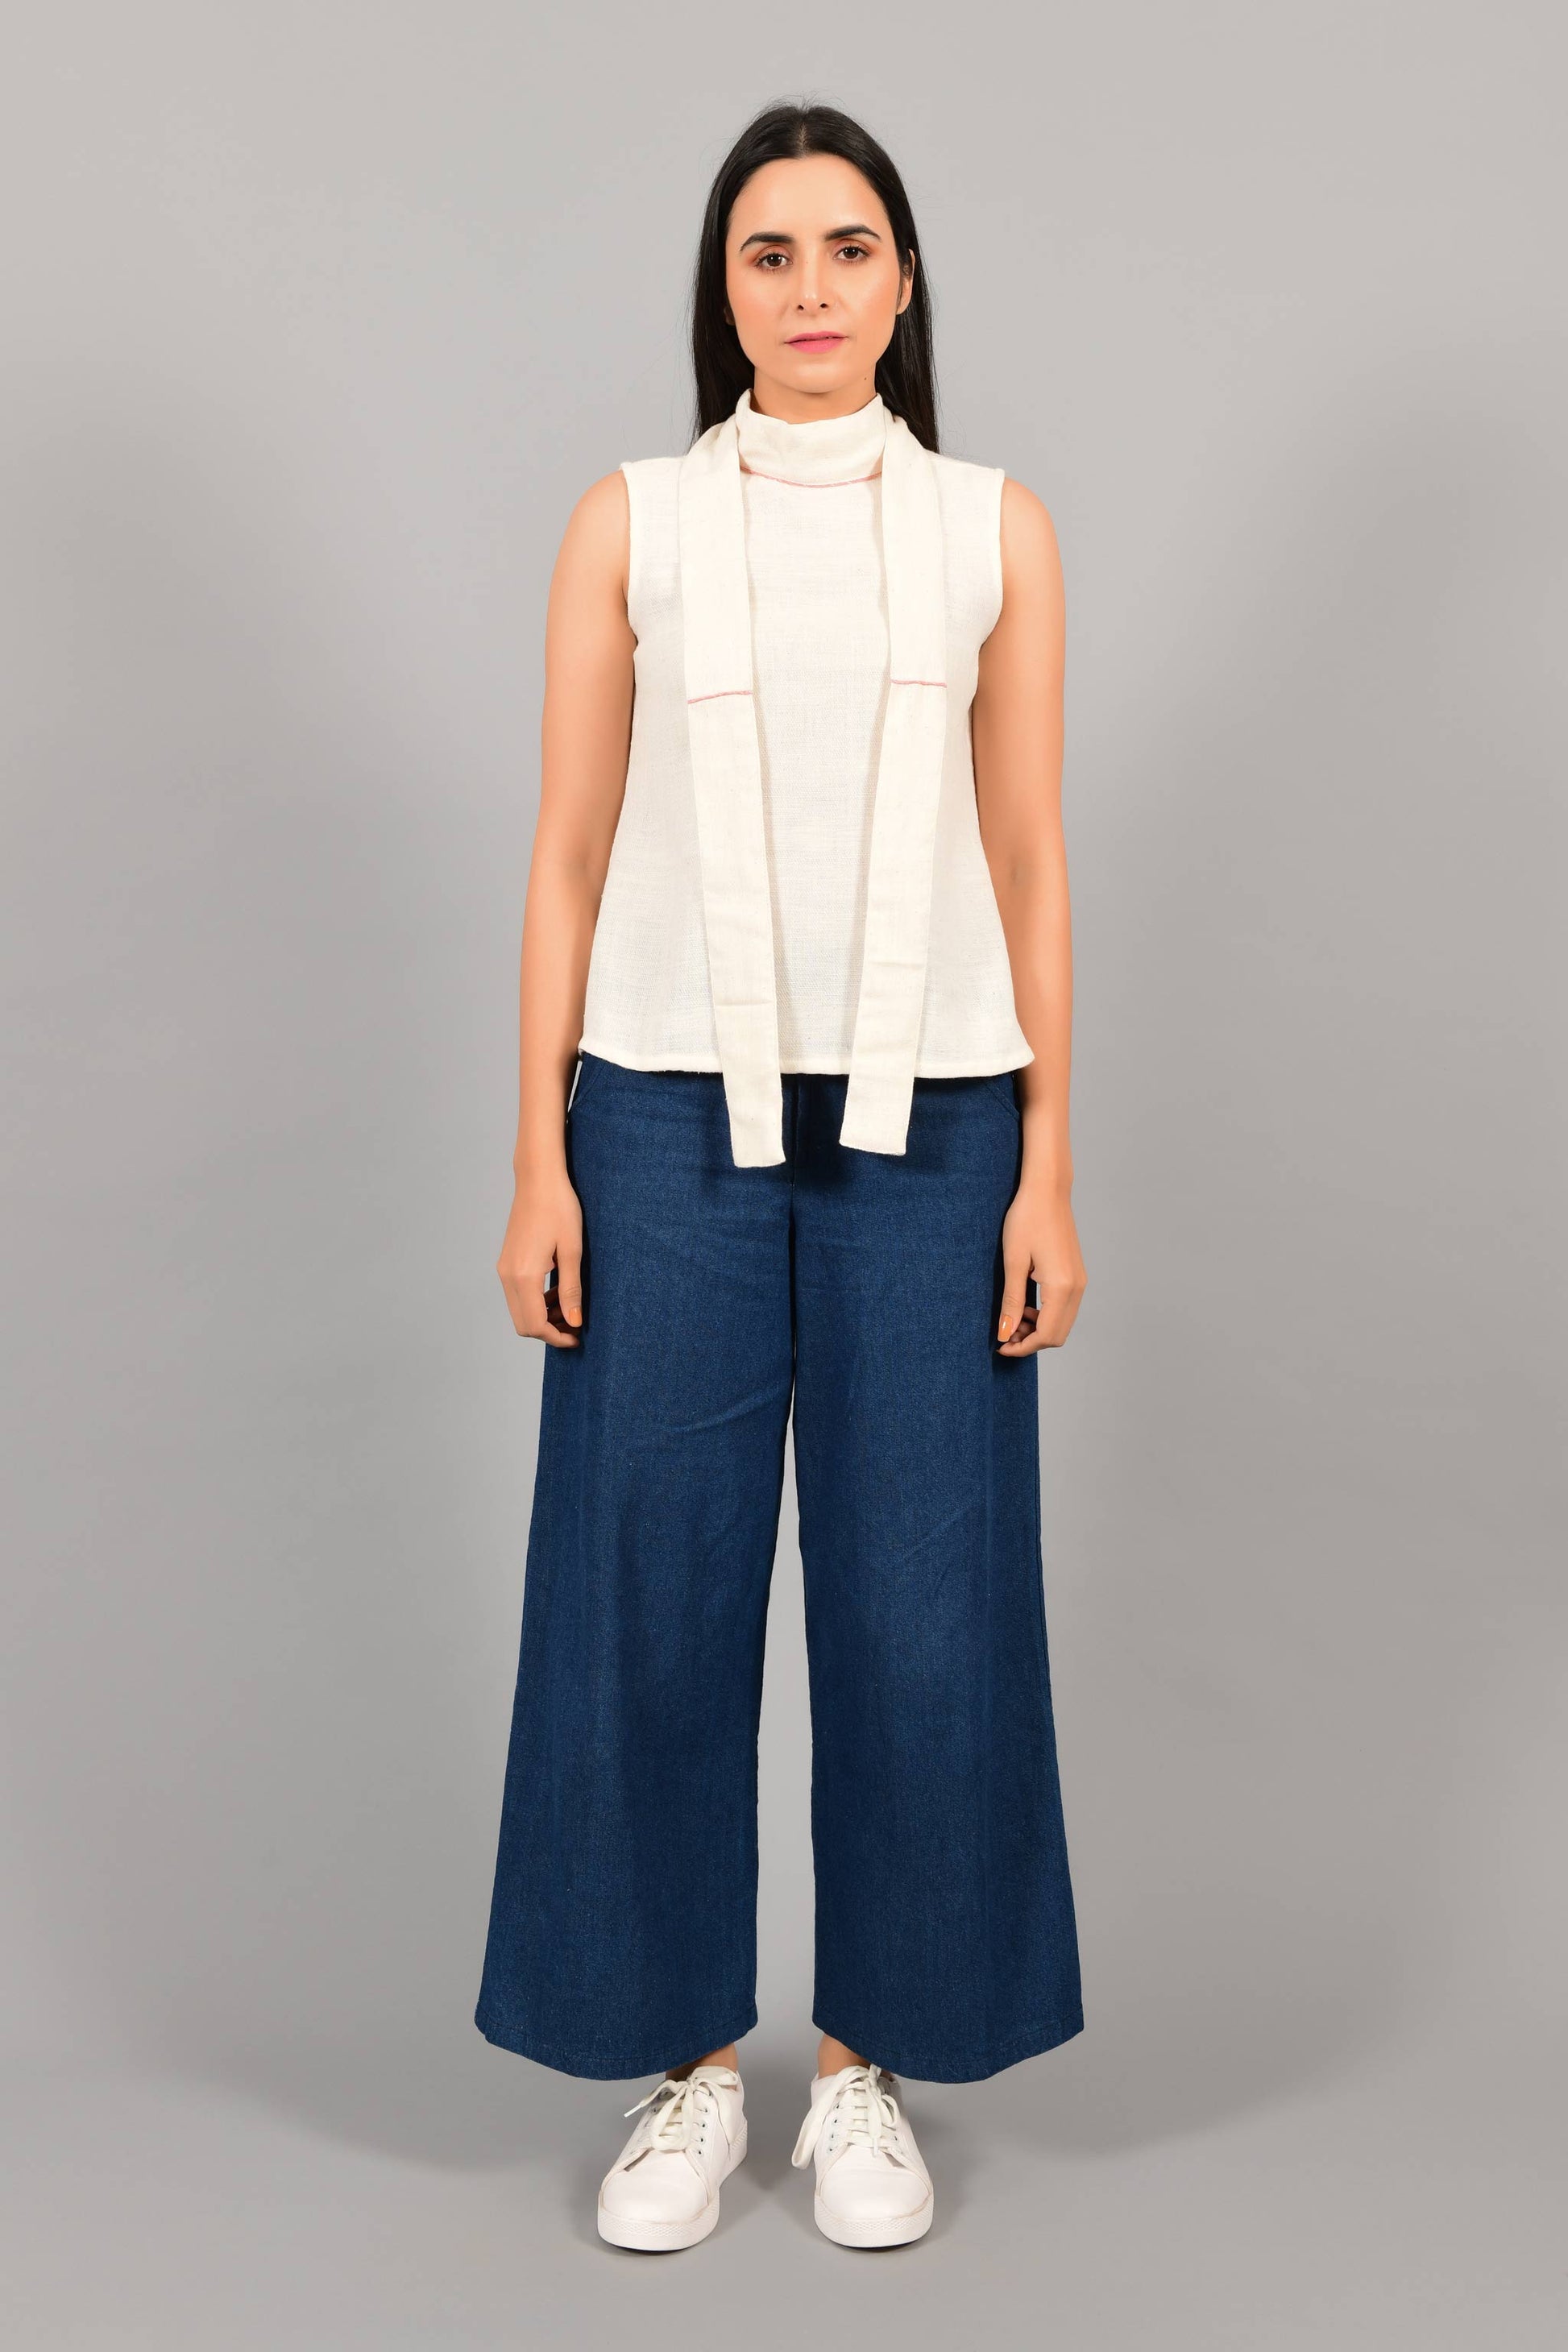 Front pose of an Indian female womenswear fashion model in an off-white Cashmere Cotton Top with bow collar straps hanging in the front, made with handspun and handwoven khadi cotton by Cotton Rack.